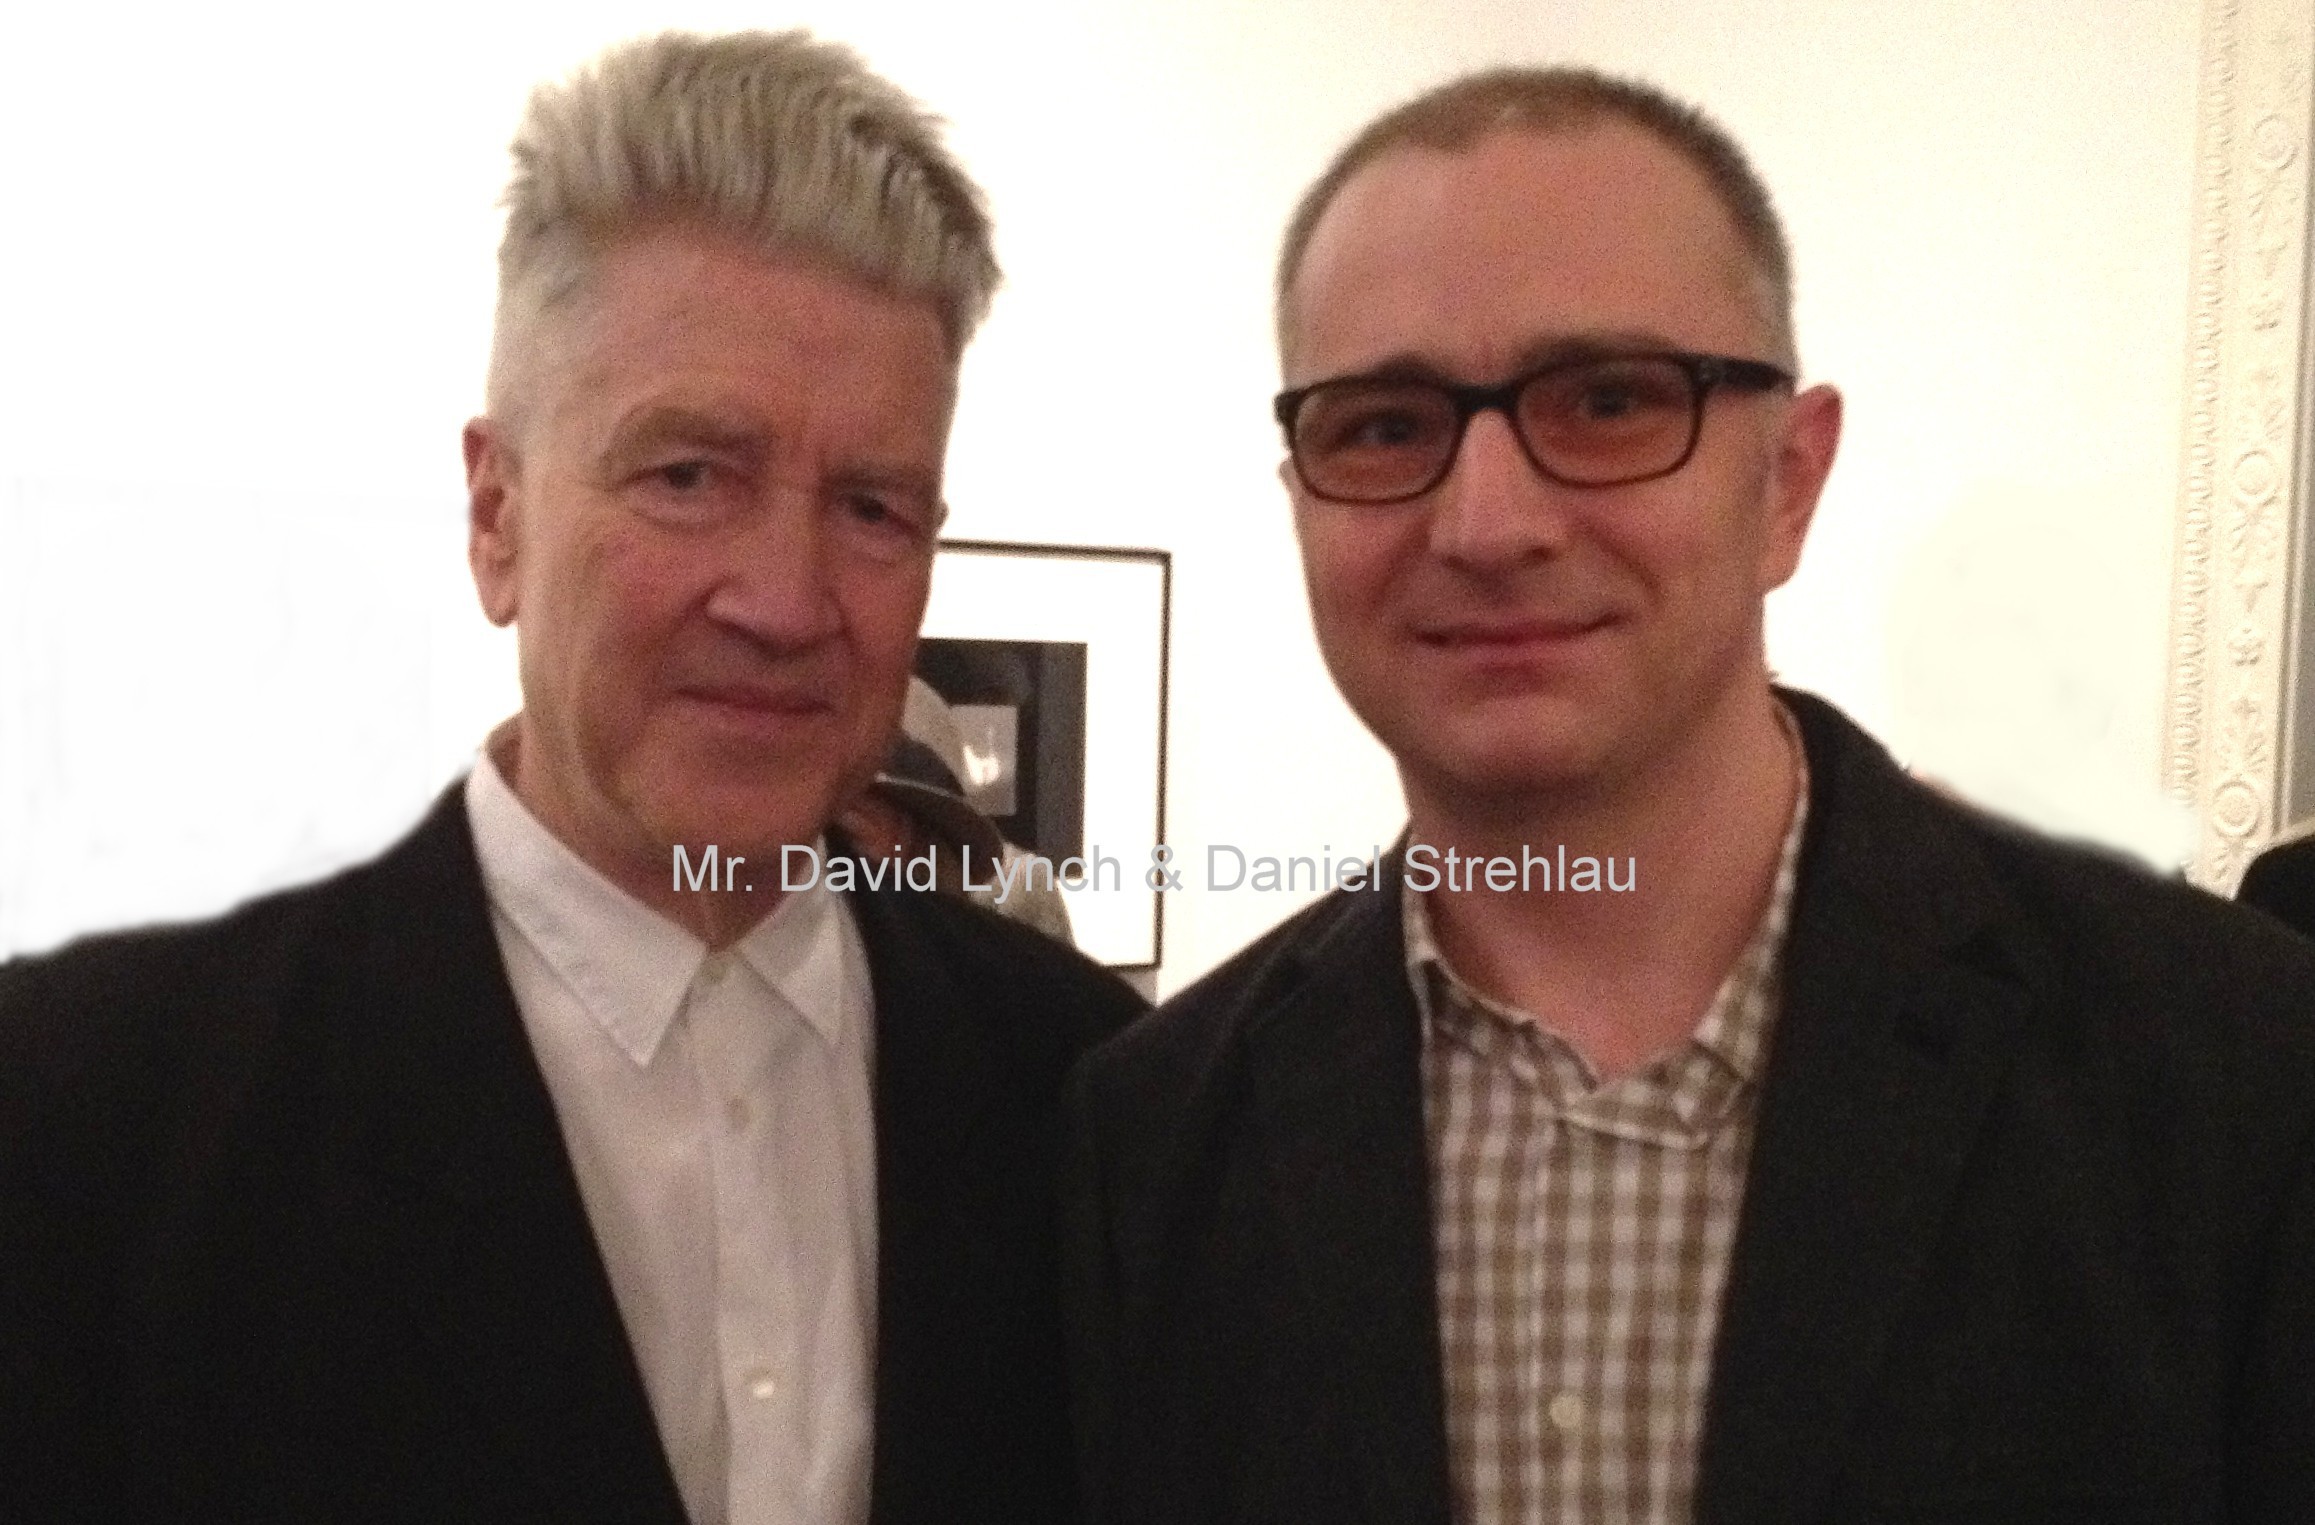 David Lynch and Daniel Strehlau after the conversation about the positive authorization of usage of the sequence from BLUE VELVET movie in the BROOKLYN narrative feature production project by Daniel Strehlau.